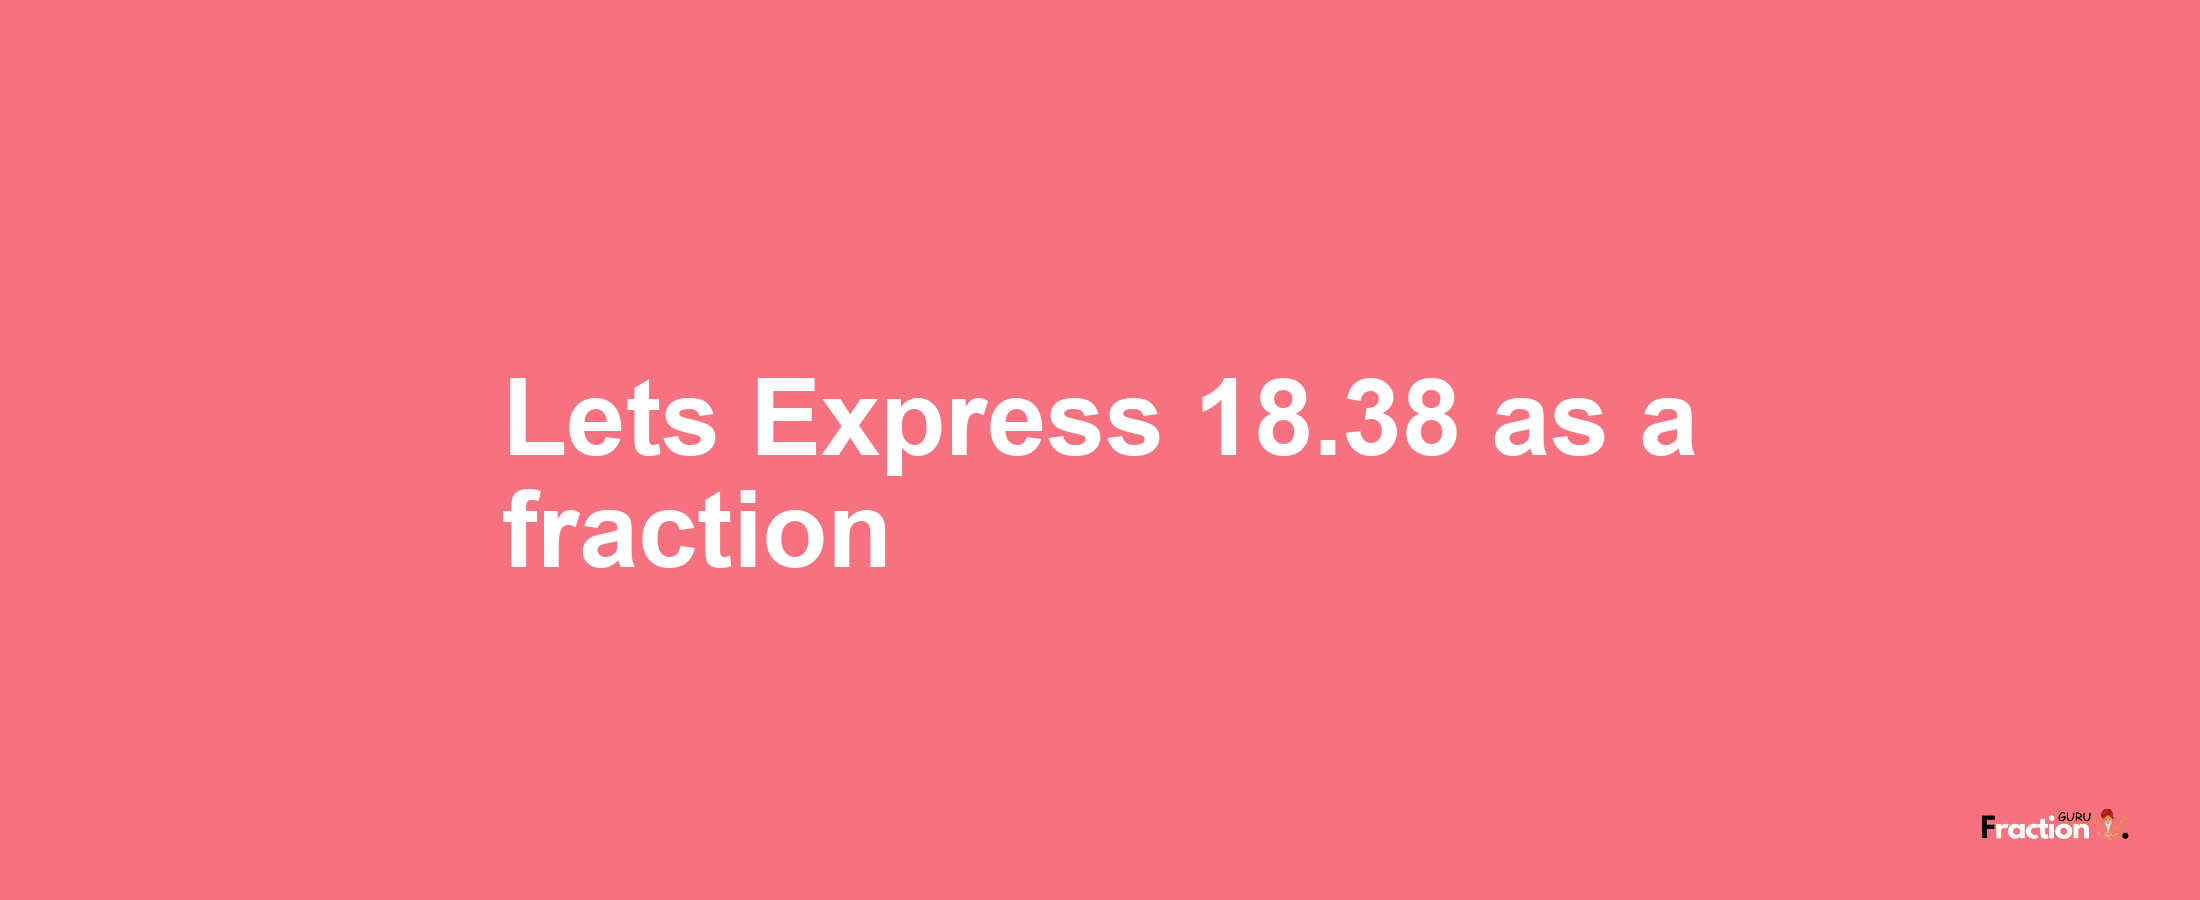 Lets Express 18.38 as afraction